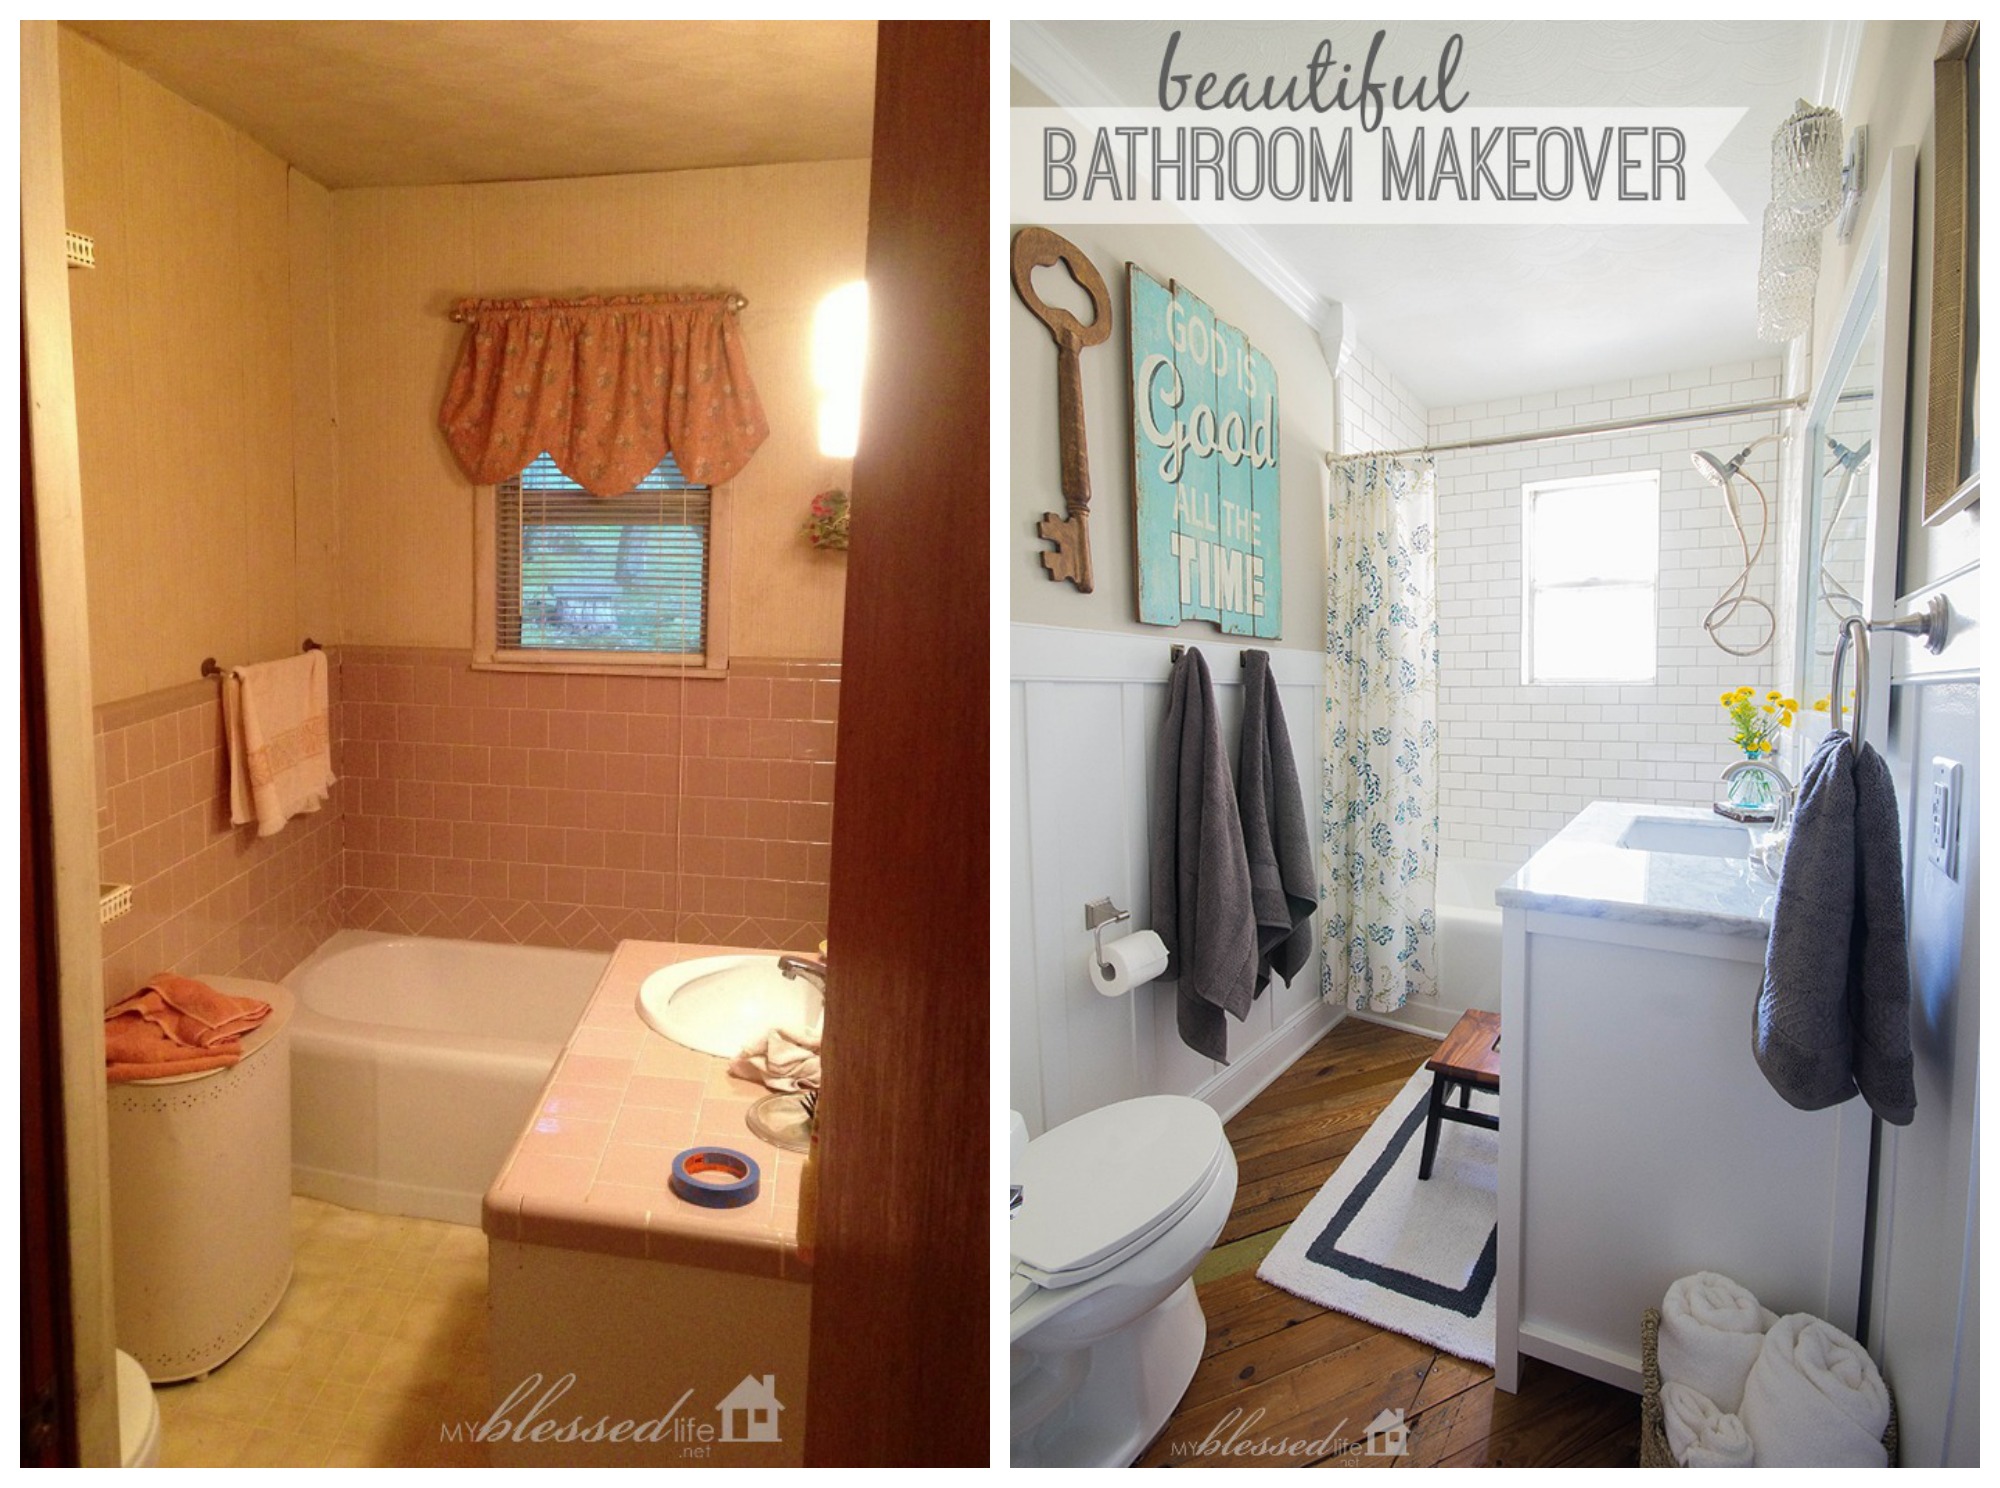 5 bathroom trends we don't want back! | Better Living Products